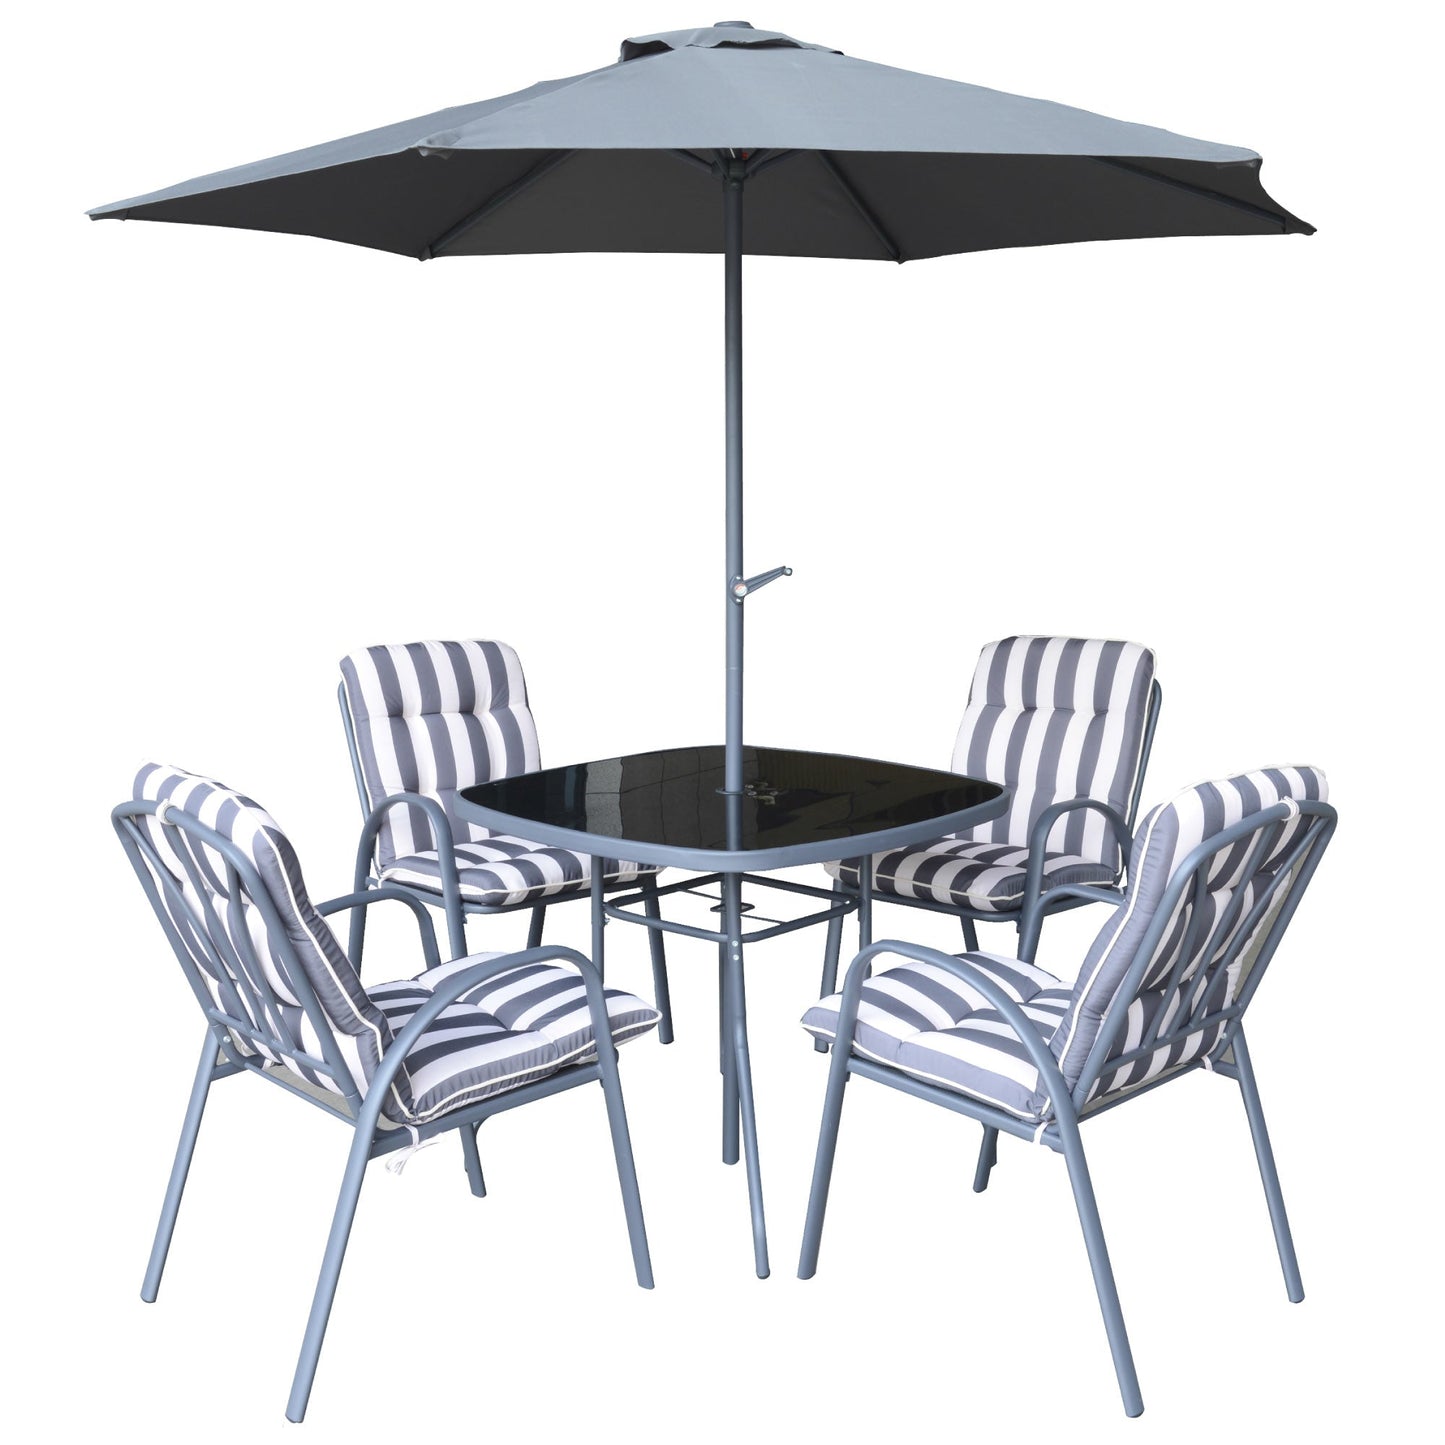 Windsor Premium Padded Garden Furniture Set - 6 Piece Table & Chairs